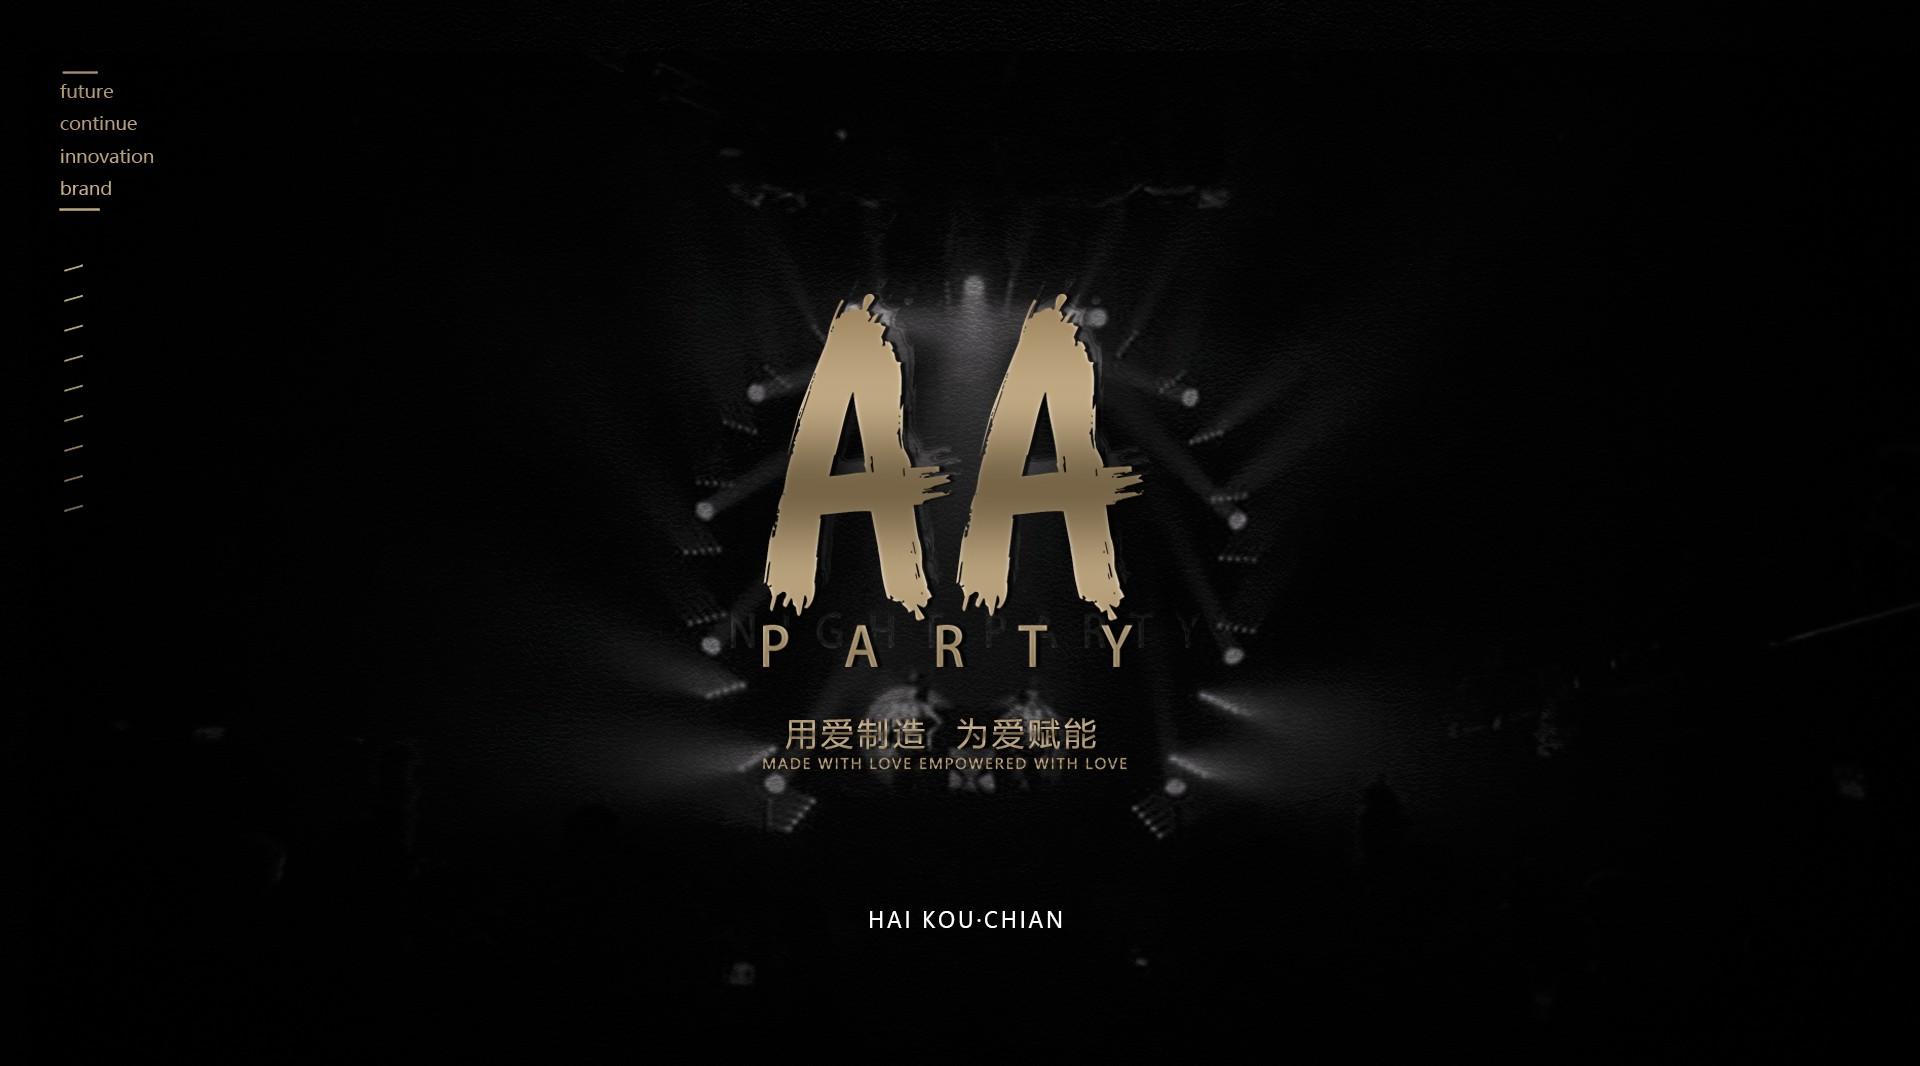 AA PARTY 1月4日开业盛典回顾